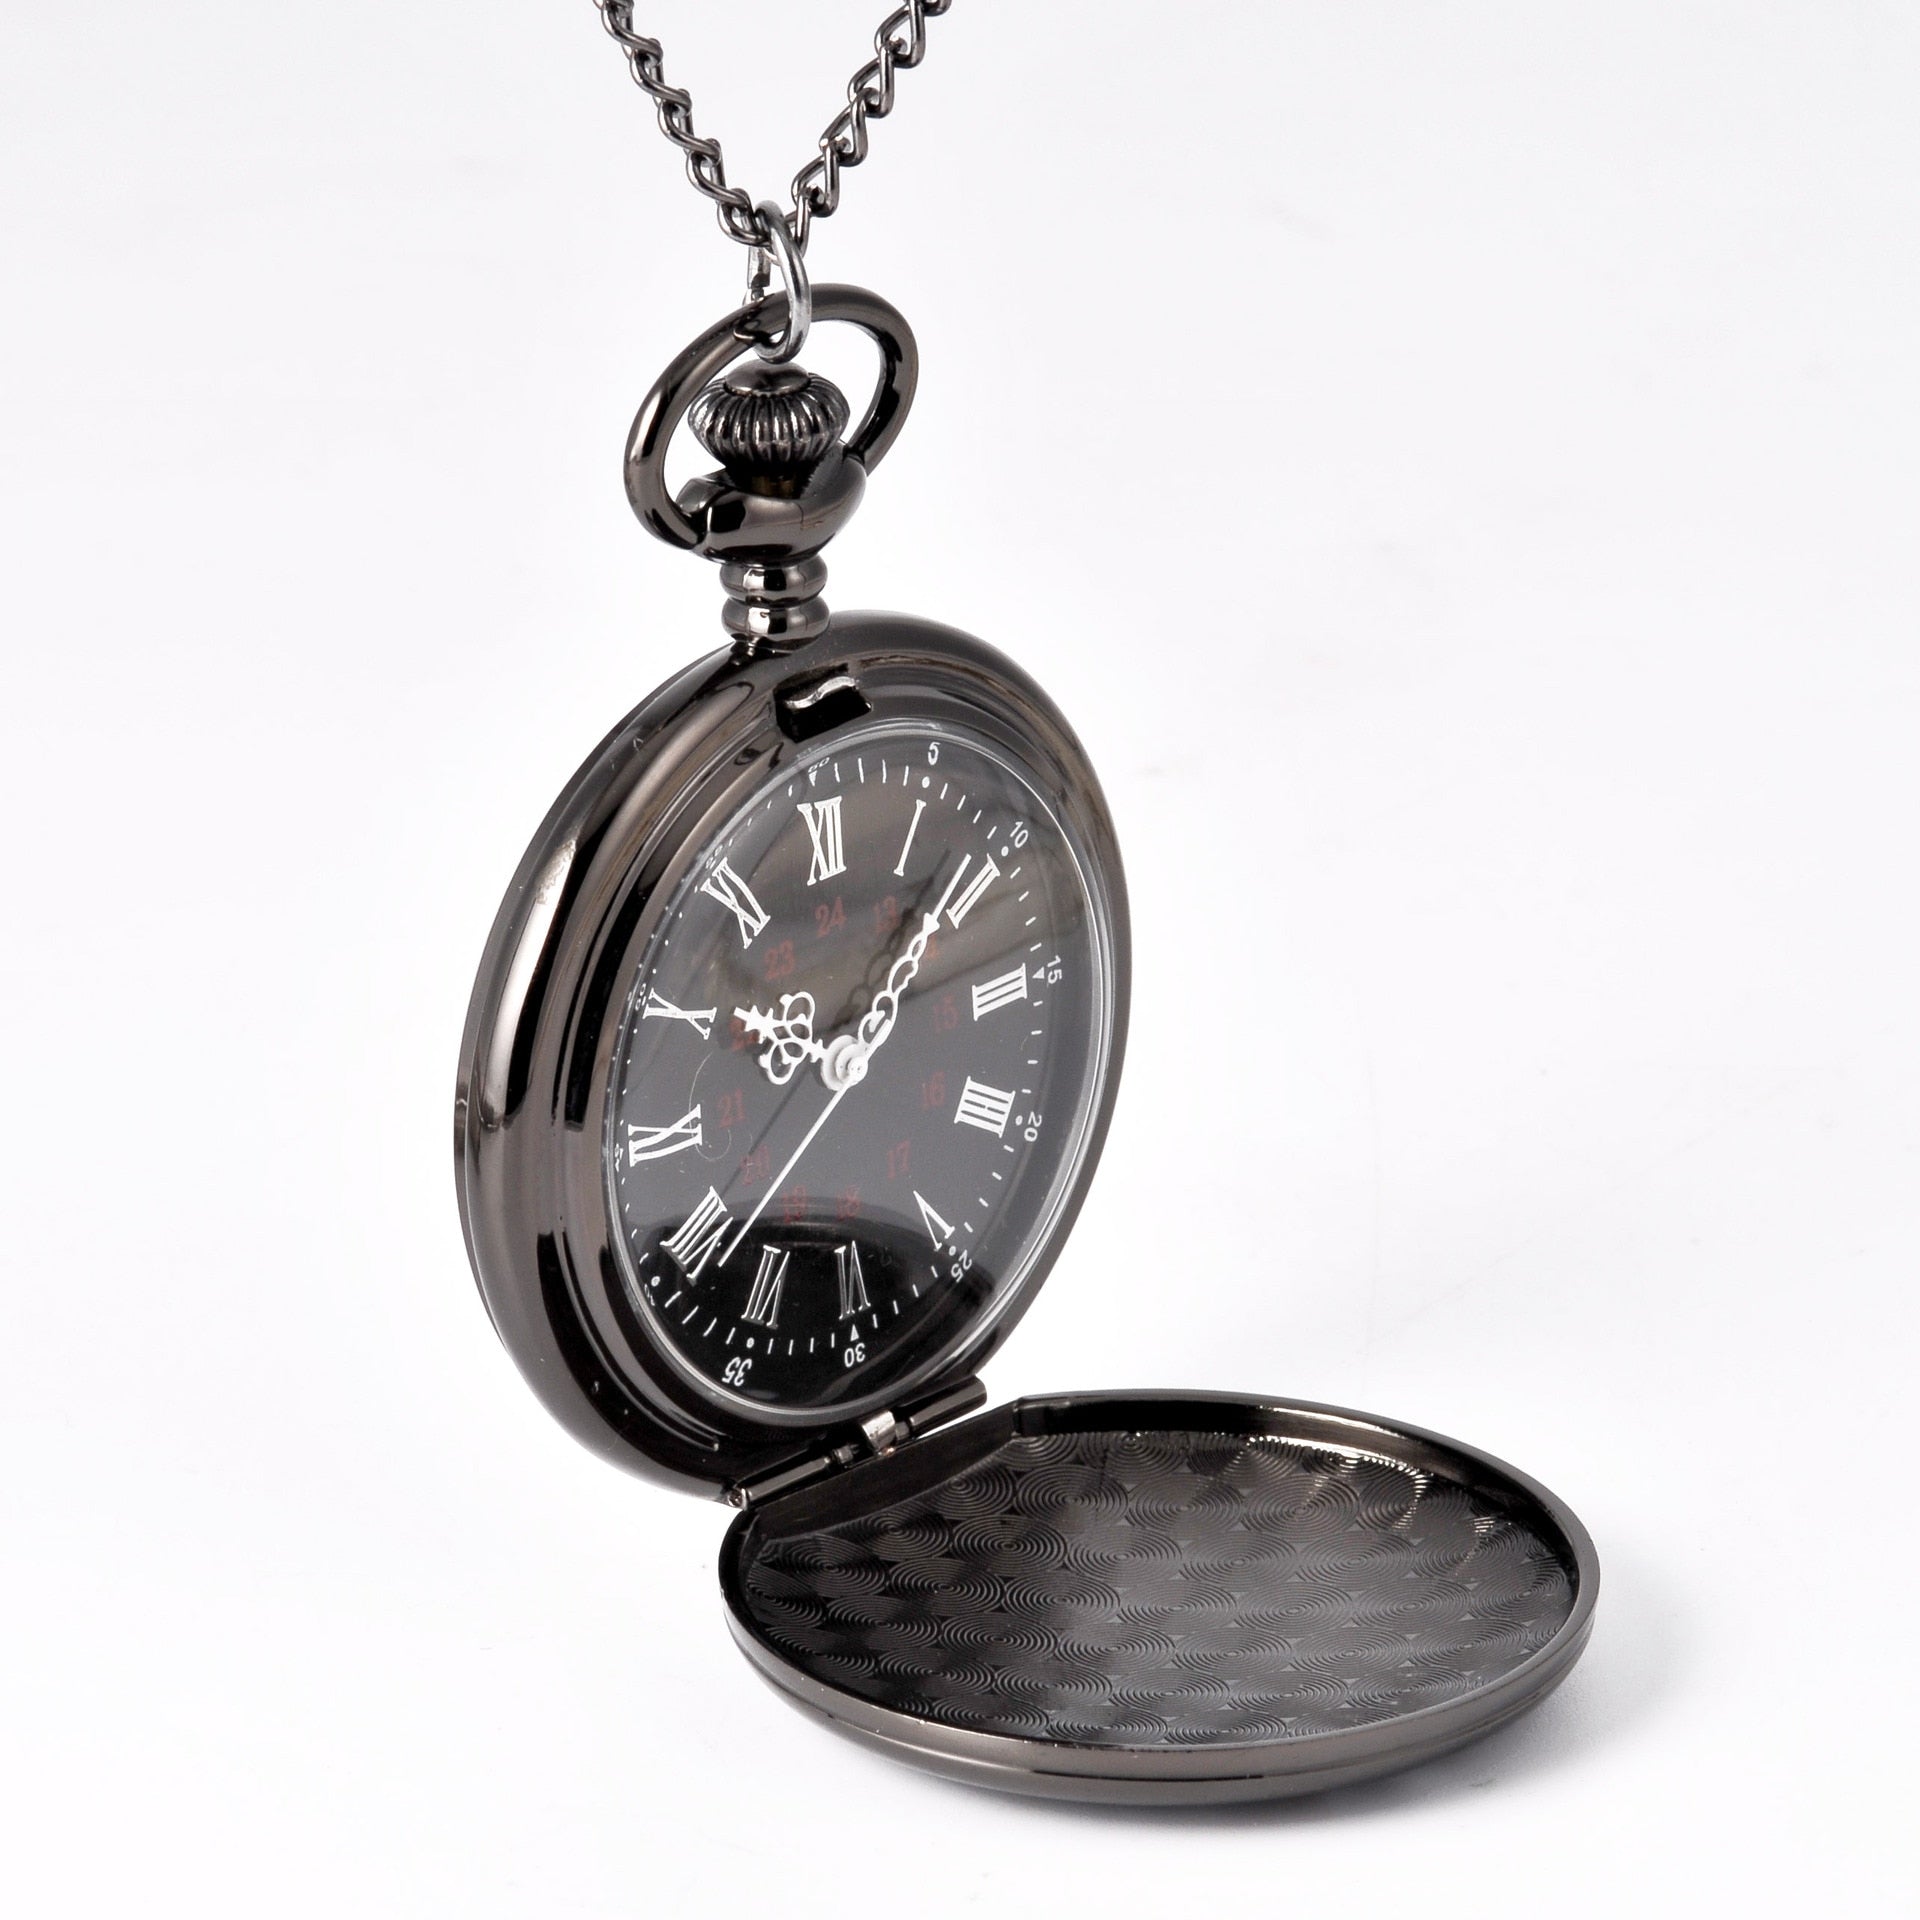 "To My Son I Love You" Series Pocket Watch